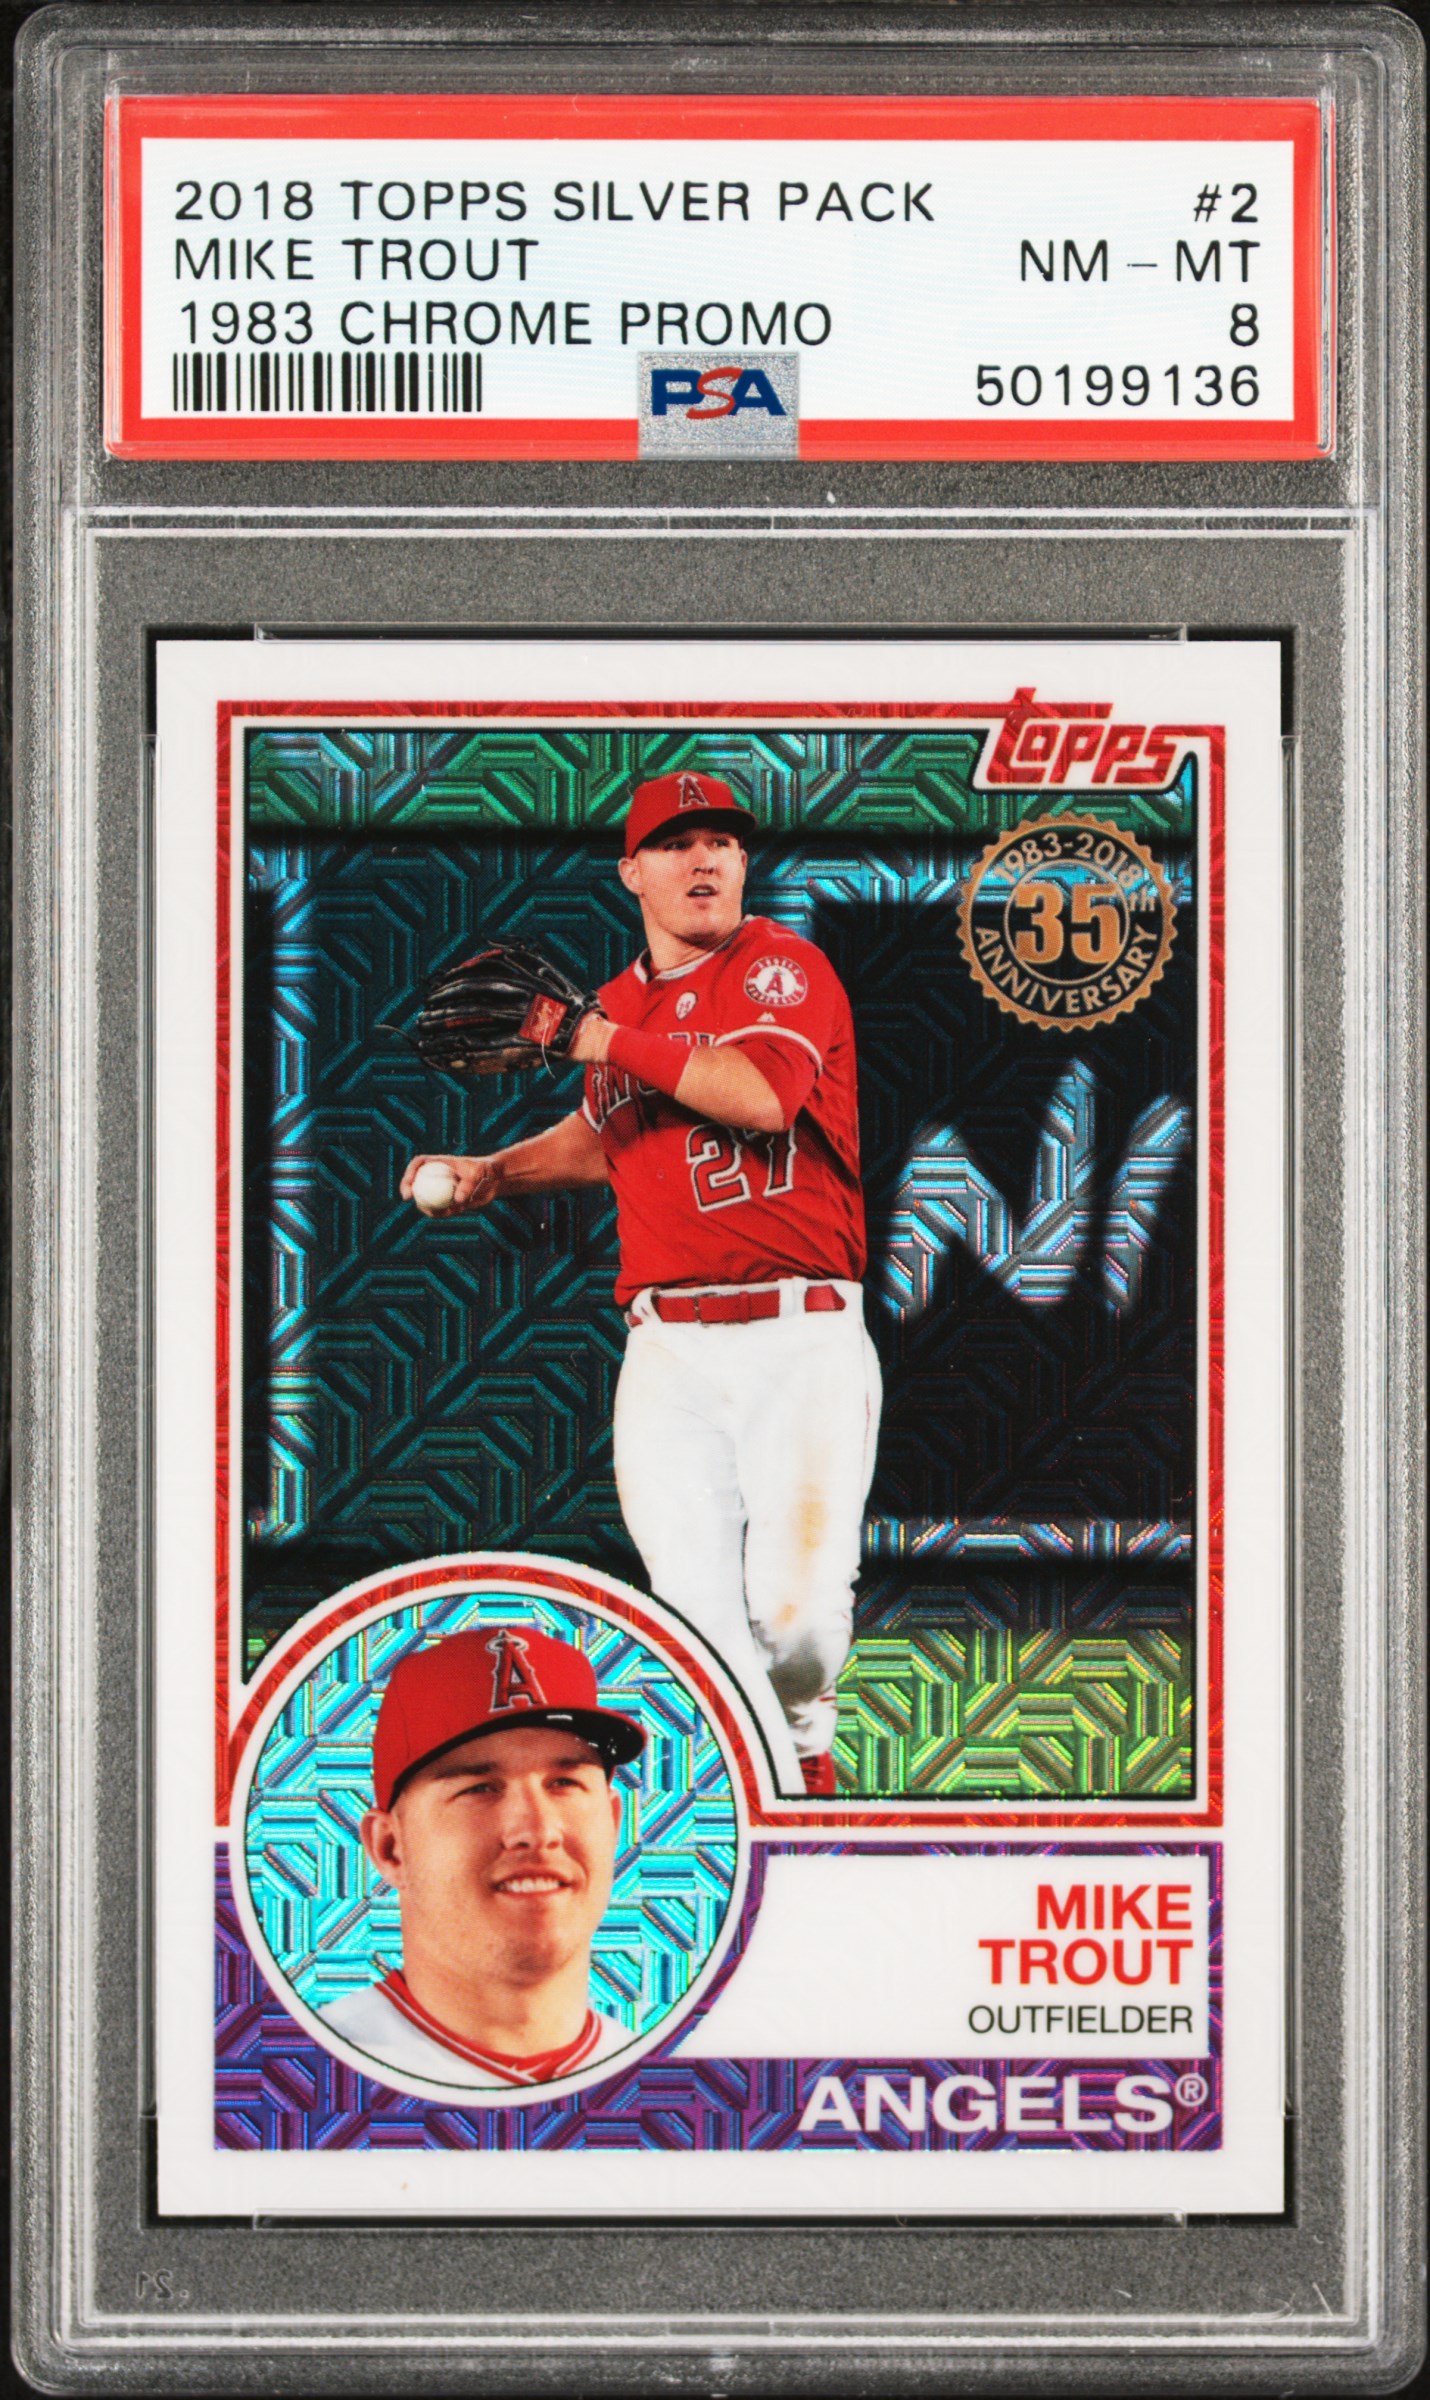 2018 Topps Silver Pack 1983 Chrome Promo #2 Mike Trout – PSA NM-MT 8